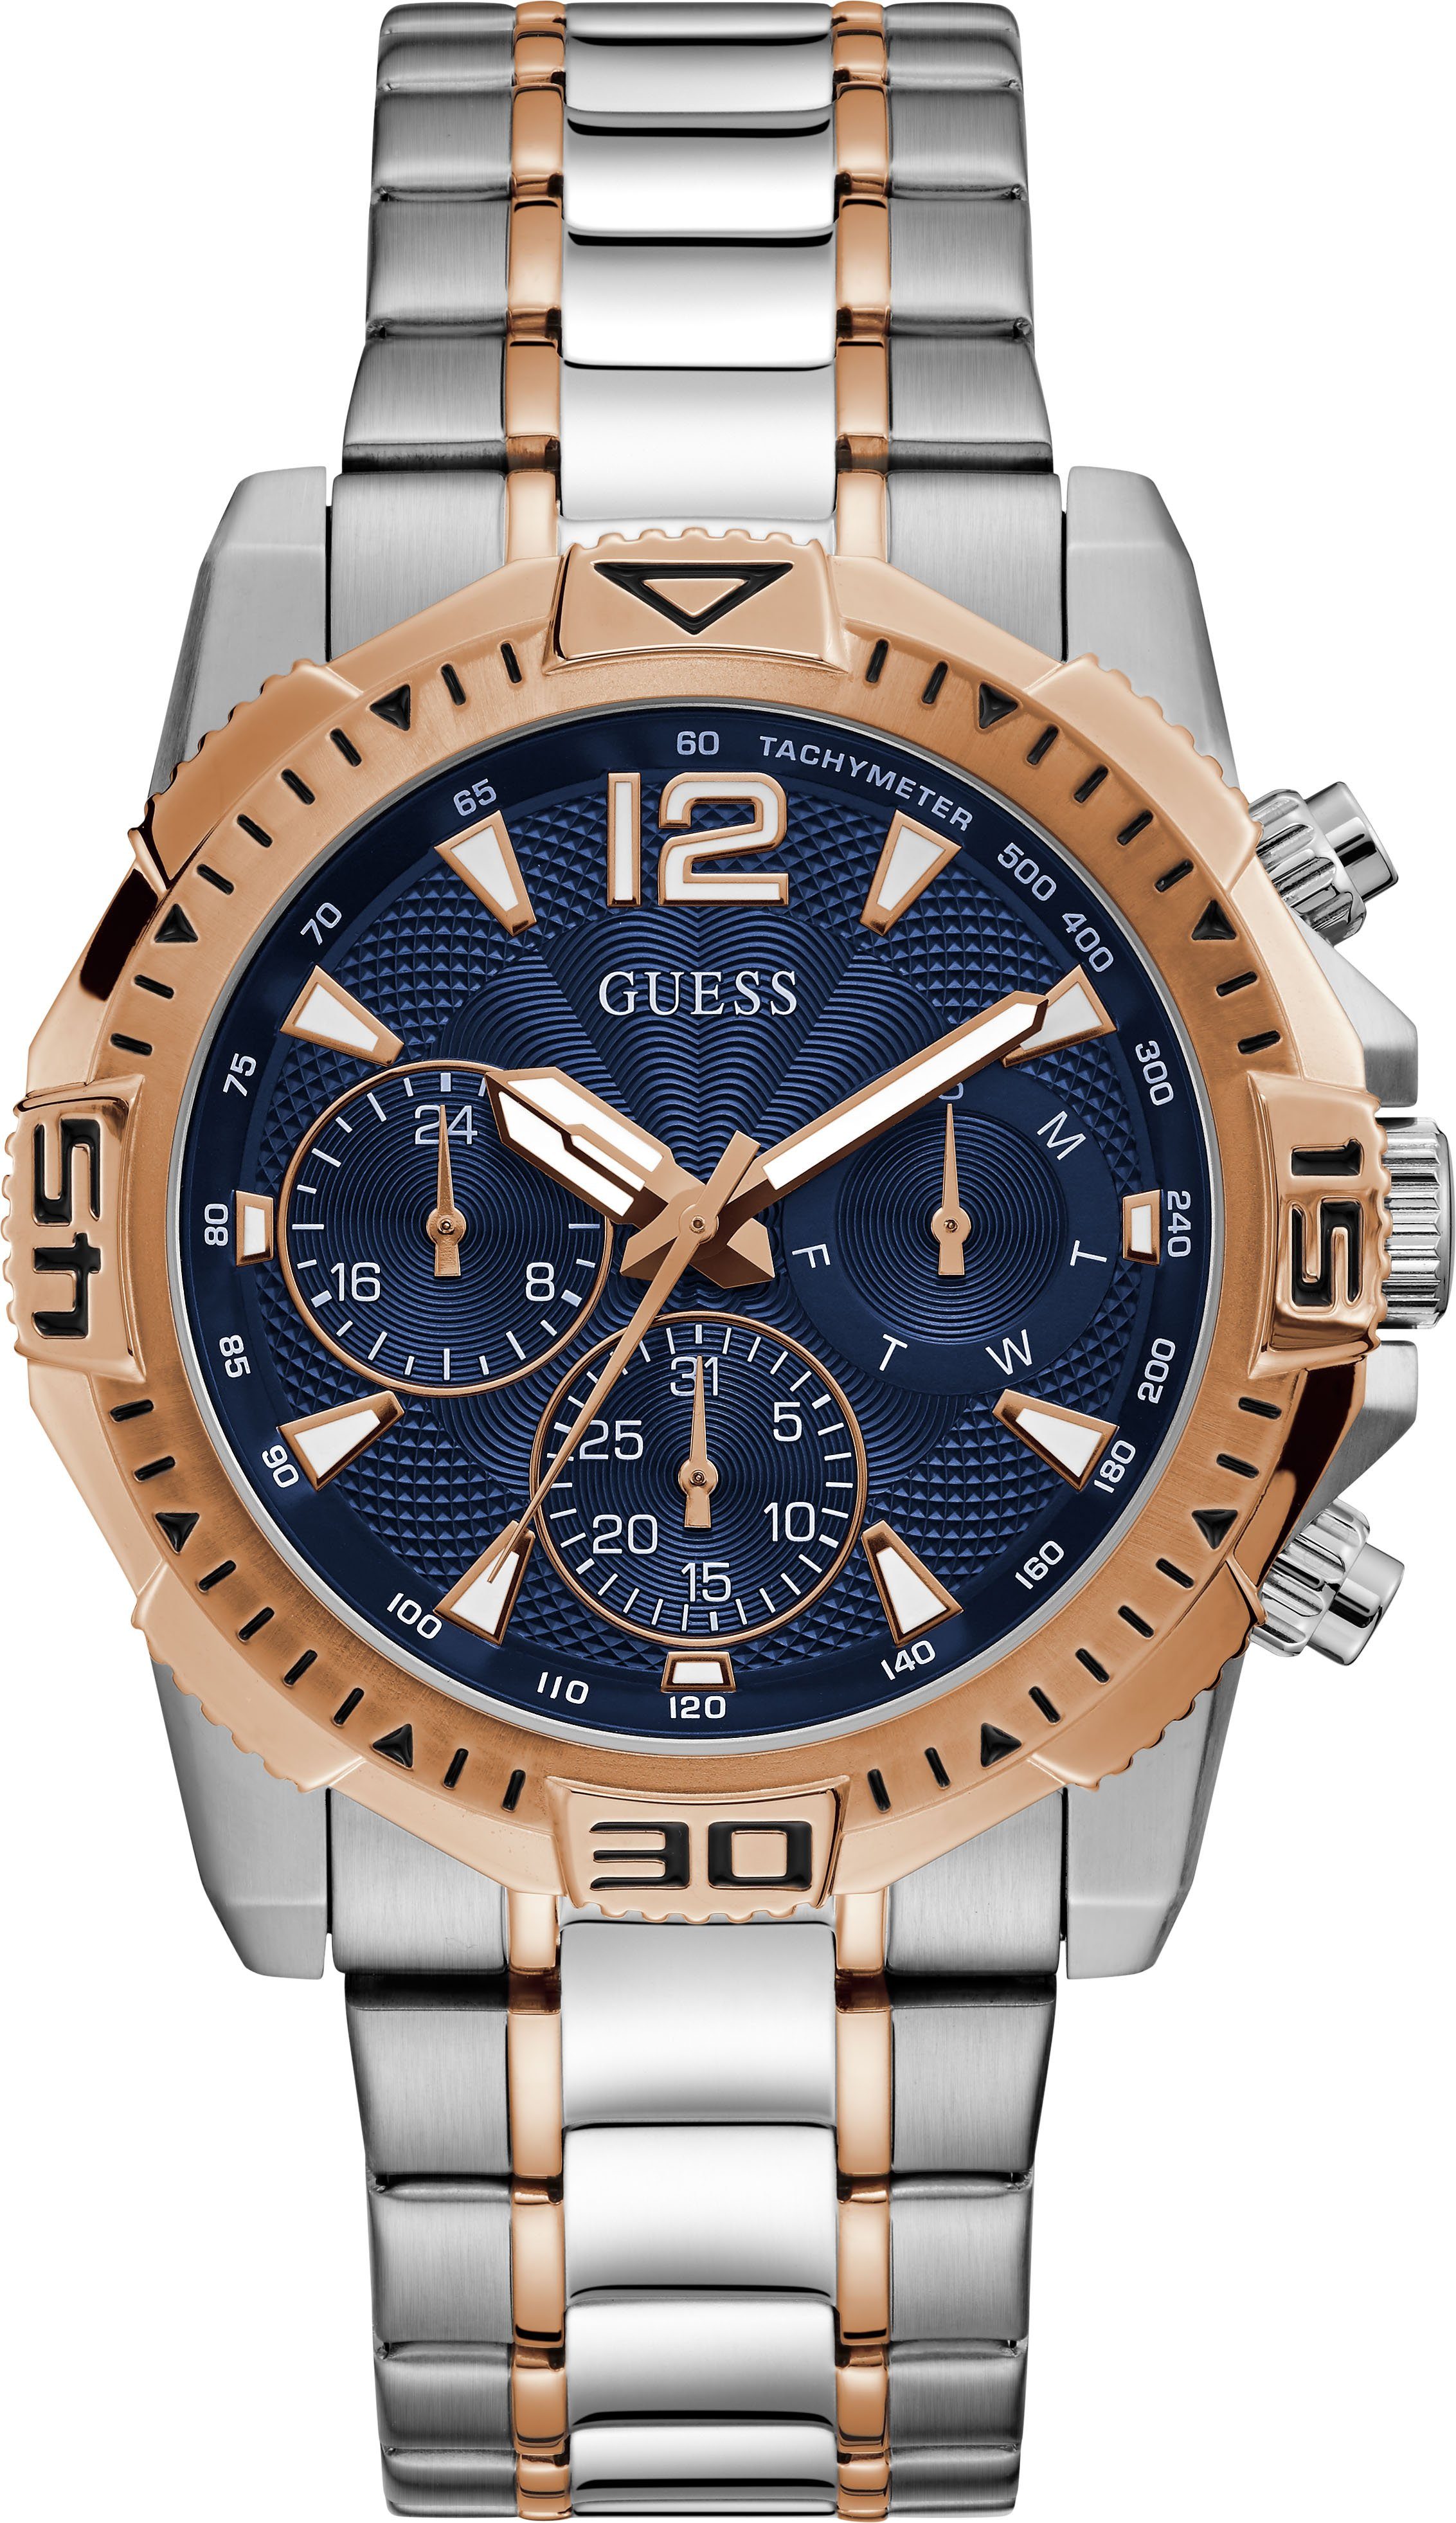 Multifunktionsuhr GW0056G5 Guess COMMANDER,